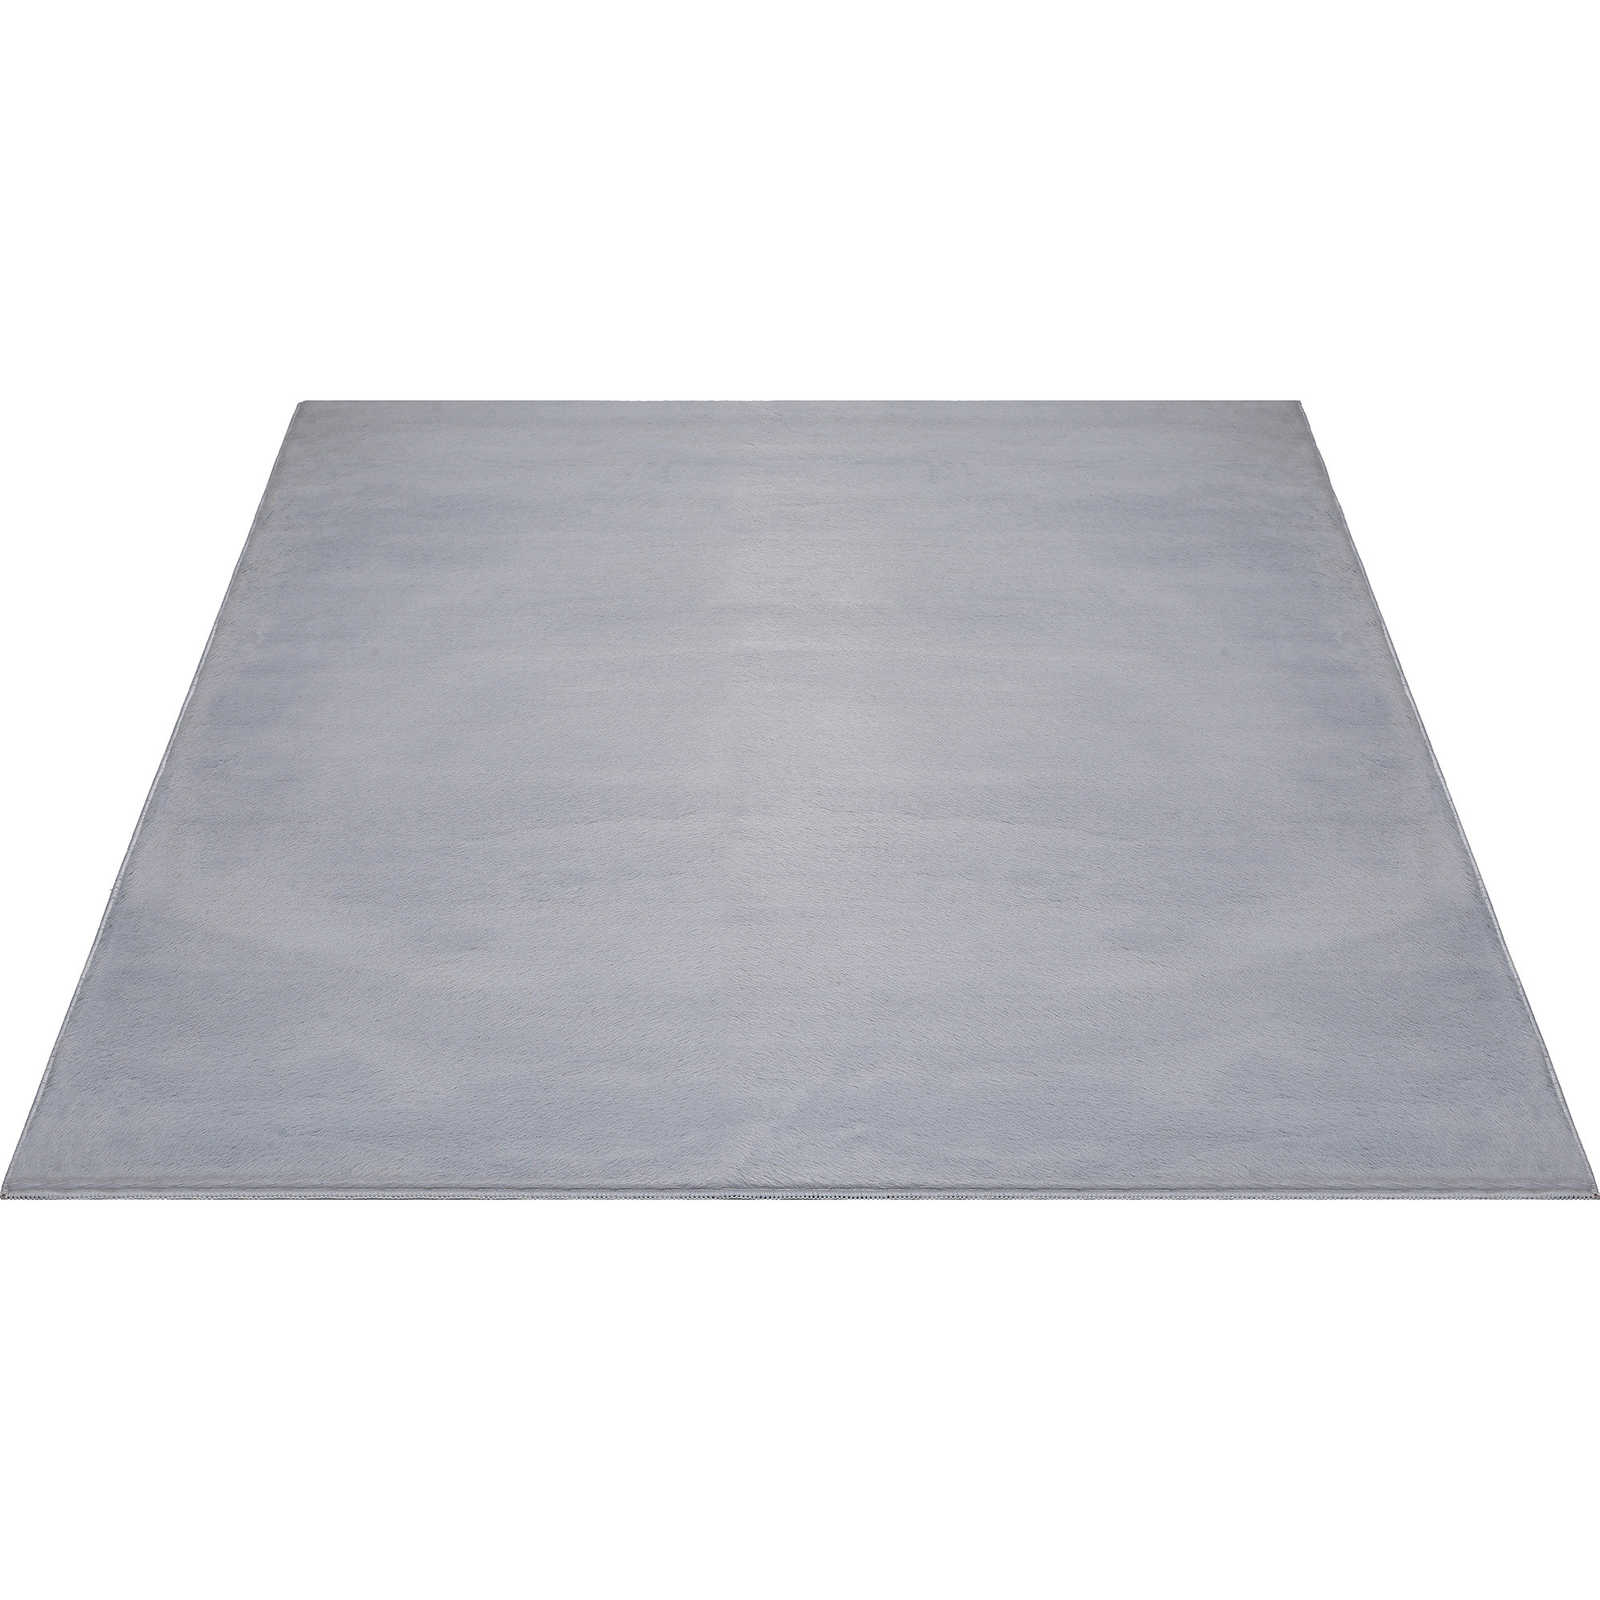 Comfortable high pile carpet in soft grey - 340 x 240 cm
